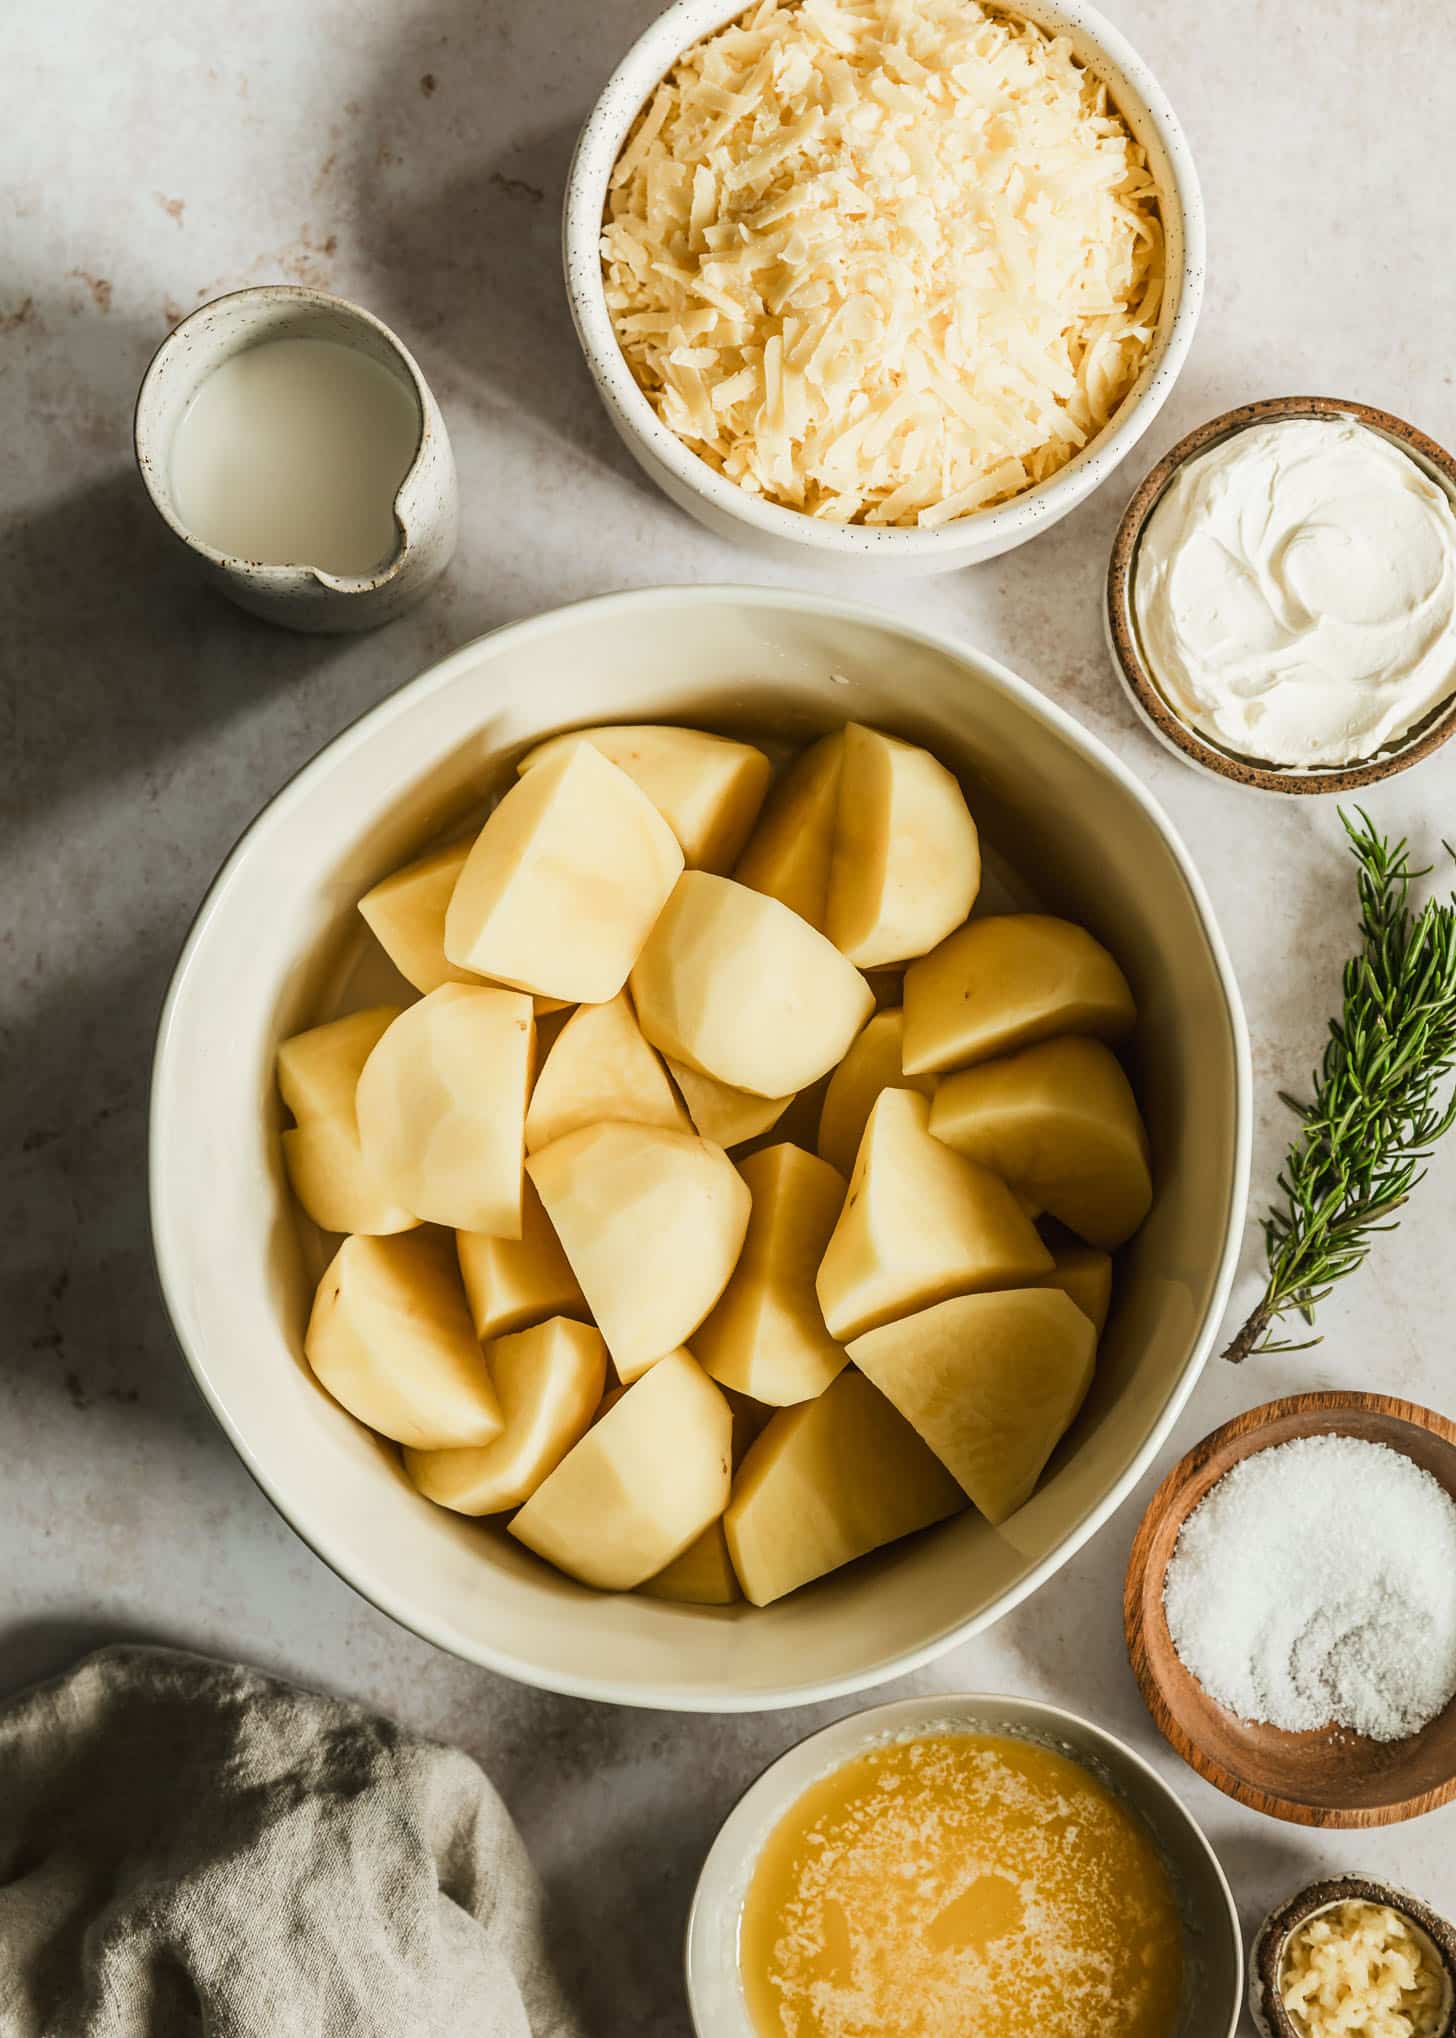 White and brown bowls of white cheddar, potatoes, creme fraiche, cream, salt, melted butter, and garlic on a beige table next to rosemary and a tan linen.